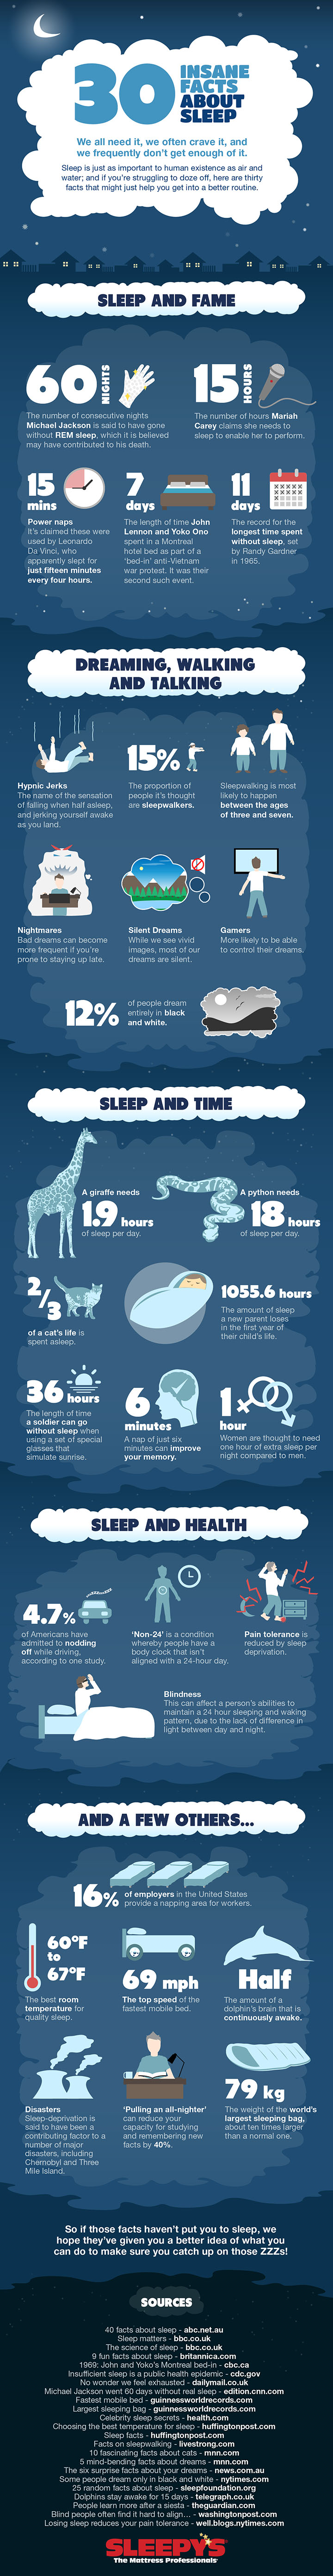 The Insane Facts About Sleep